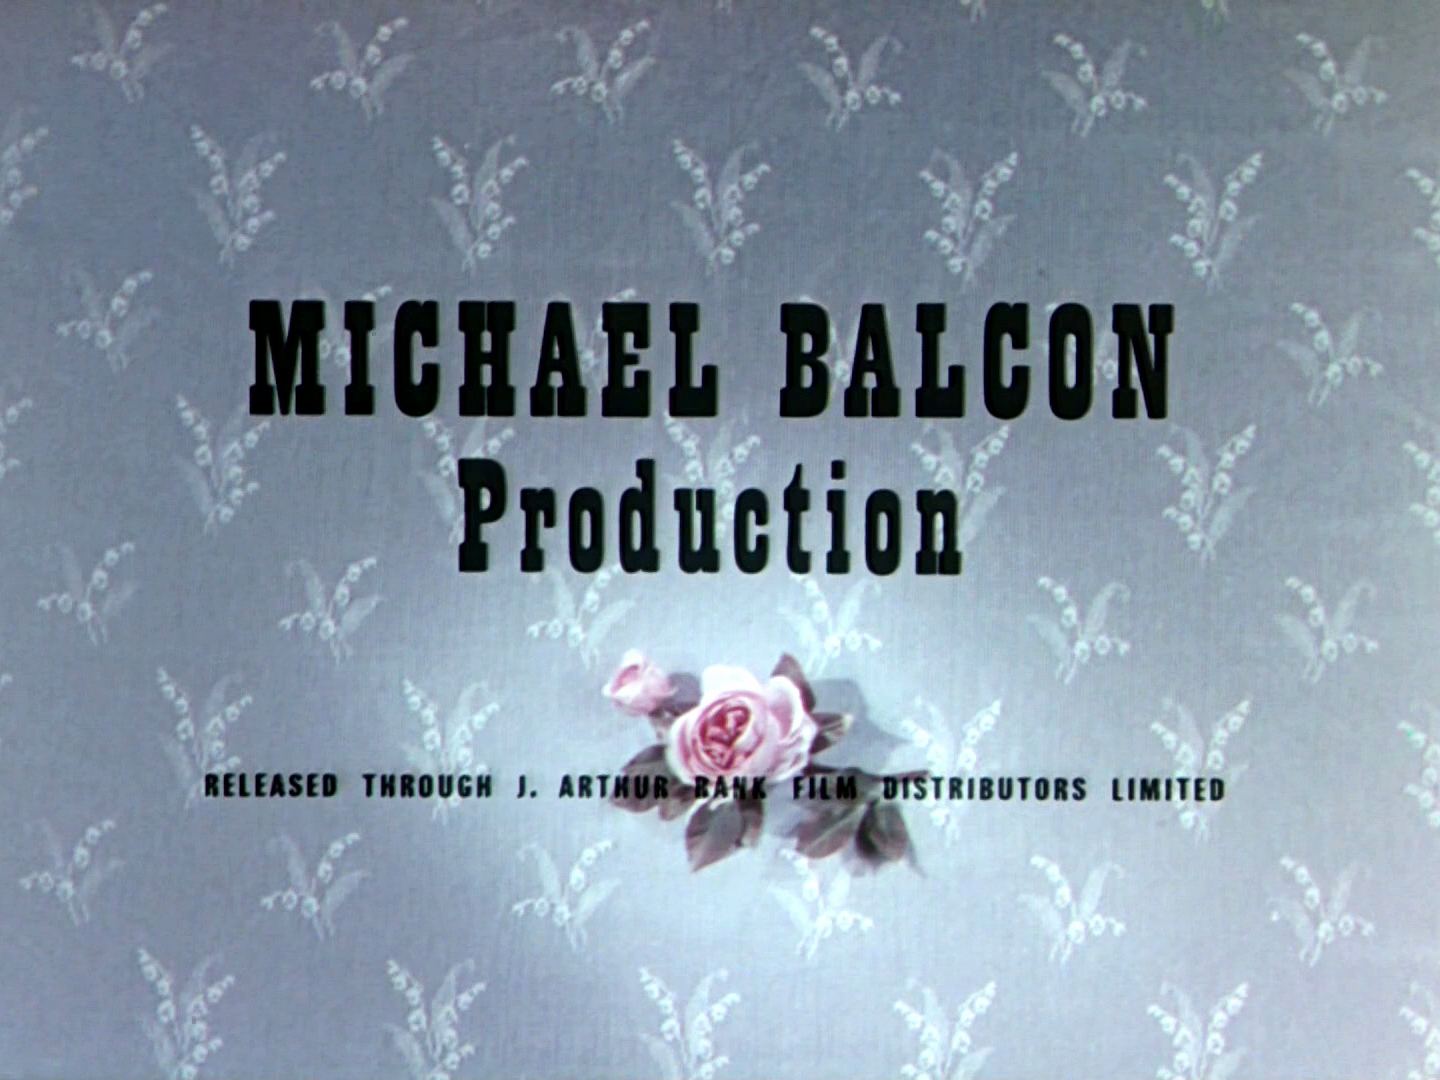 Main title from The Ladykillers (1955) (3).  Michael Balcon Production.  Released throigh J Arthur Rank Film Distributors Limited